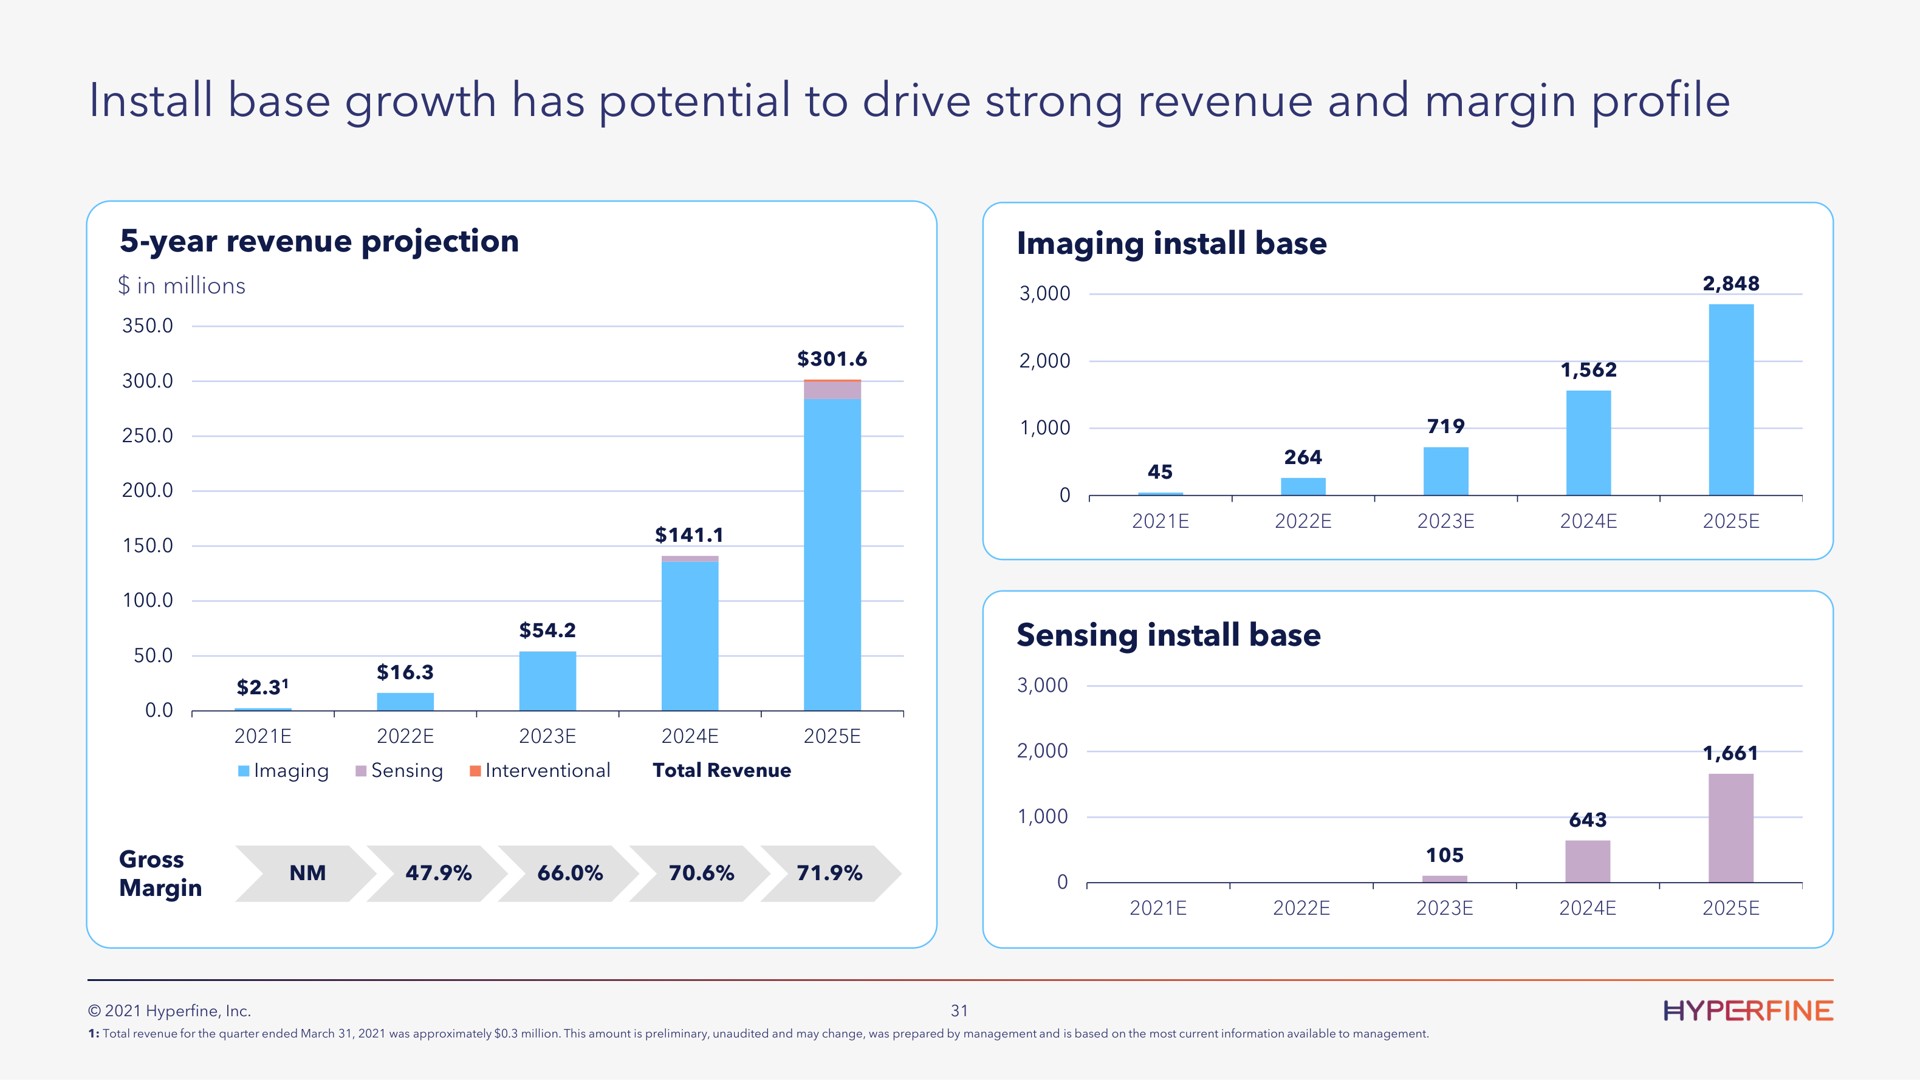 install base growth has potential to drive strong revenue and margin profile | Hyperfine